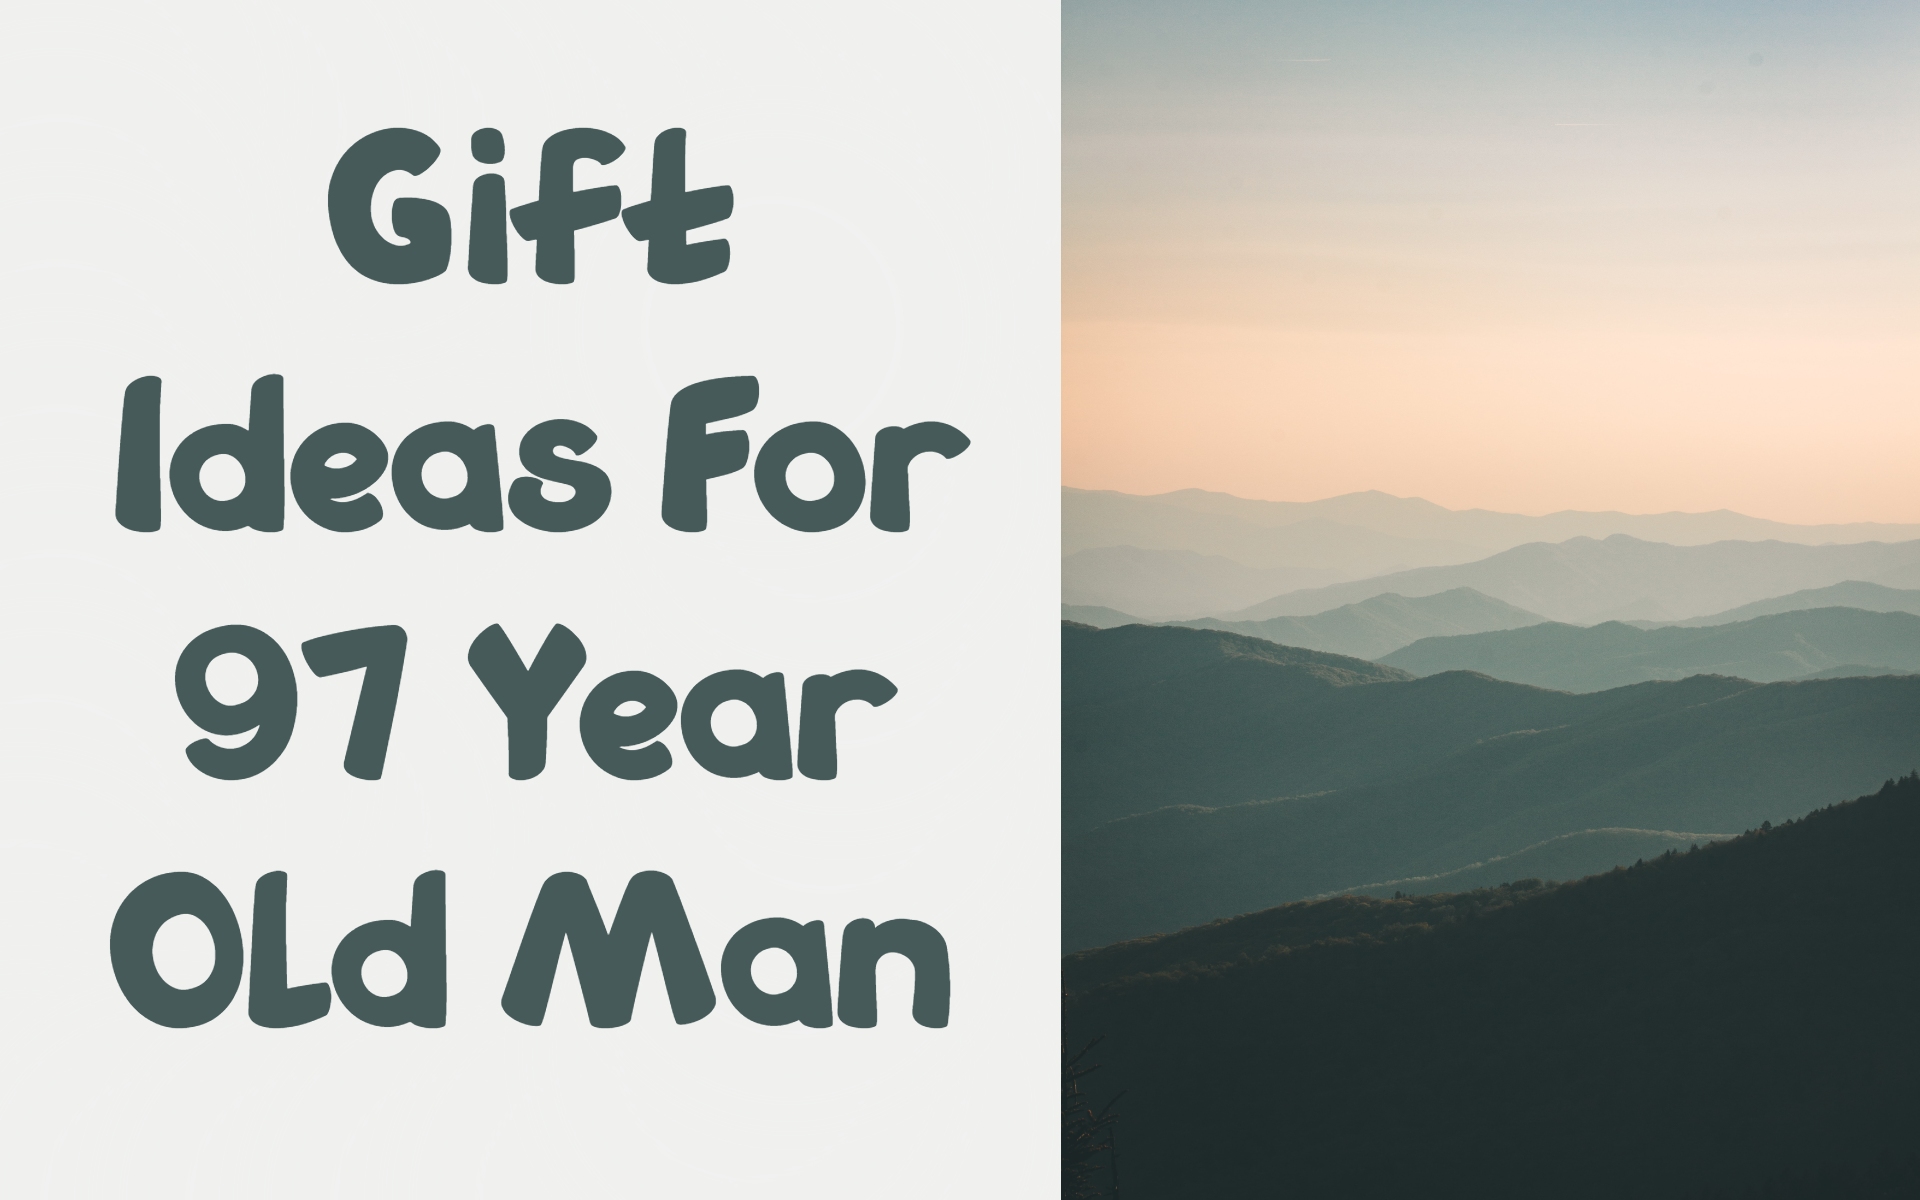 Cover image of gift ideas for 97-year-old man by Giftsedge